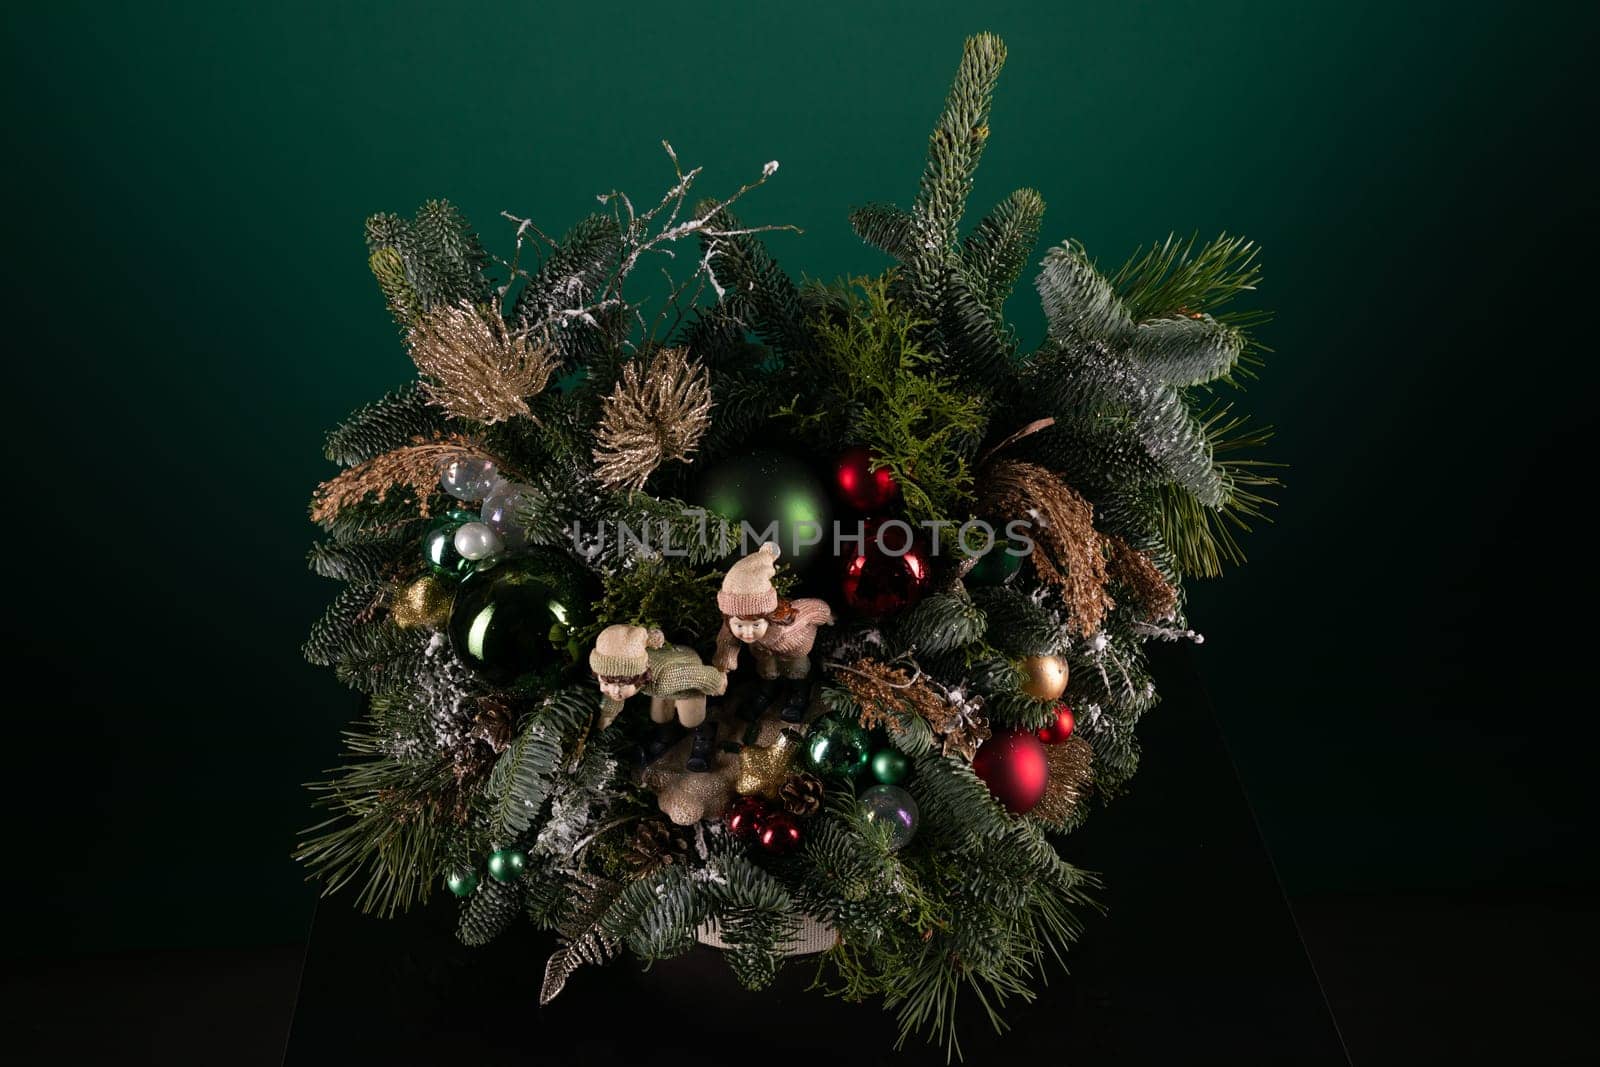 A Christmas Wreath With Ornaments on a Table by TRMK